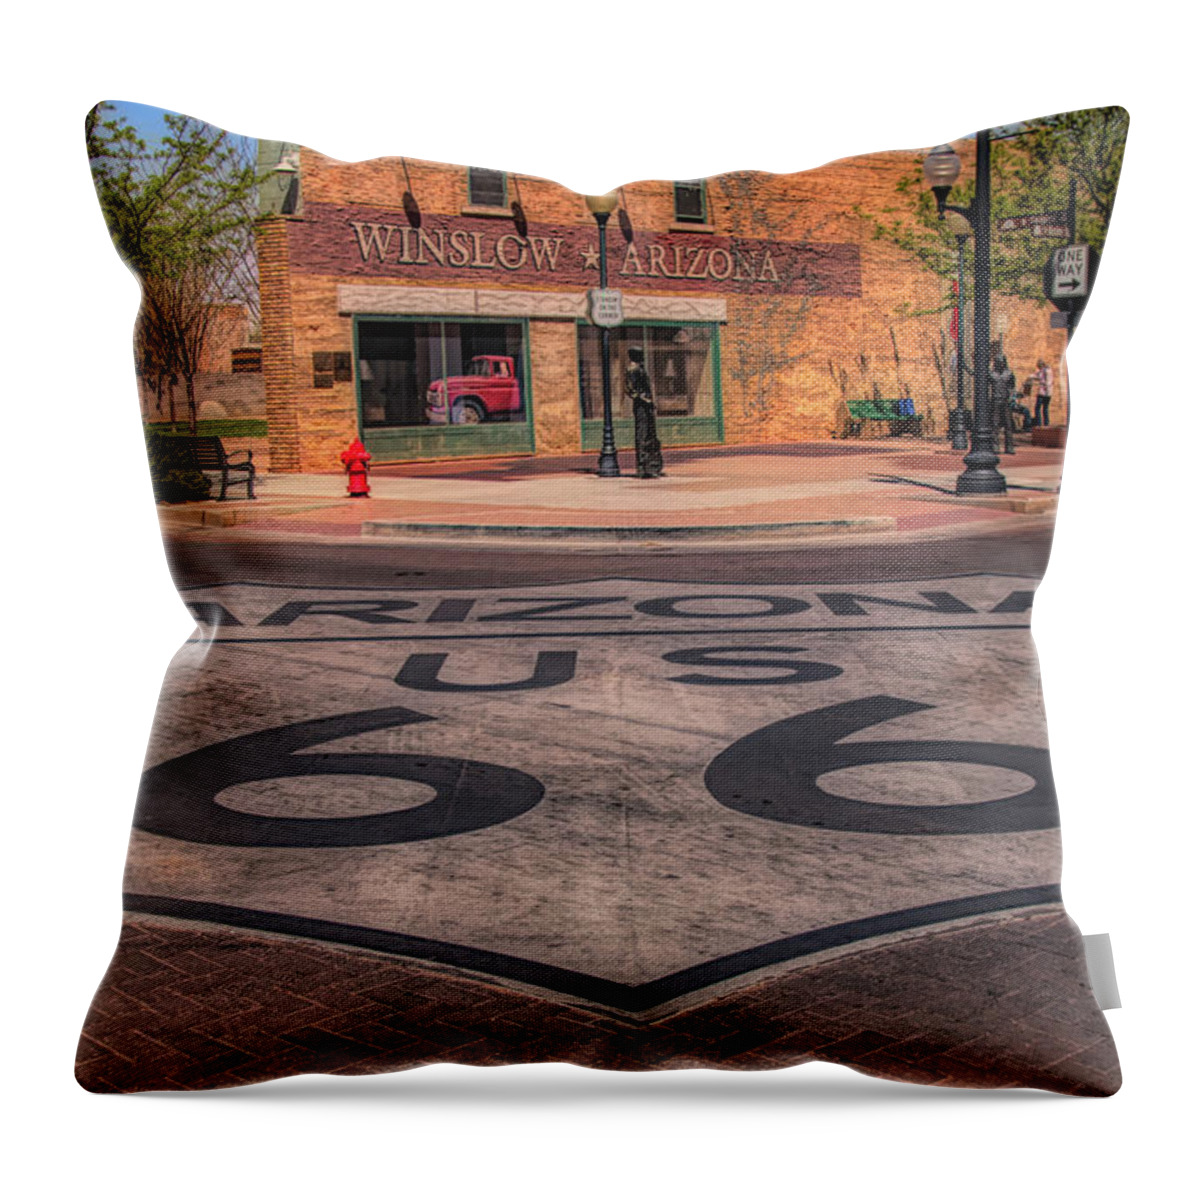 Winslow Arizona Throw Pillow featuring the photograph Standin on the corner by Jeff Folger